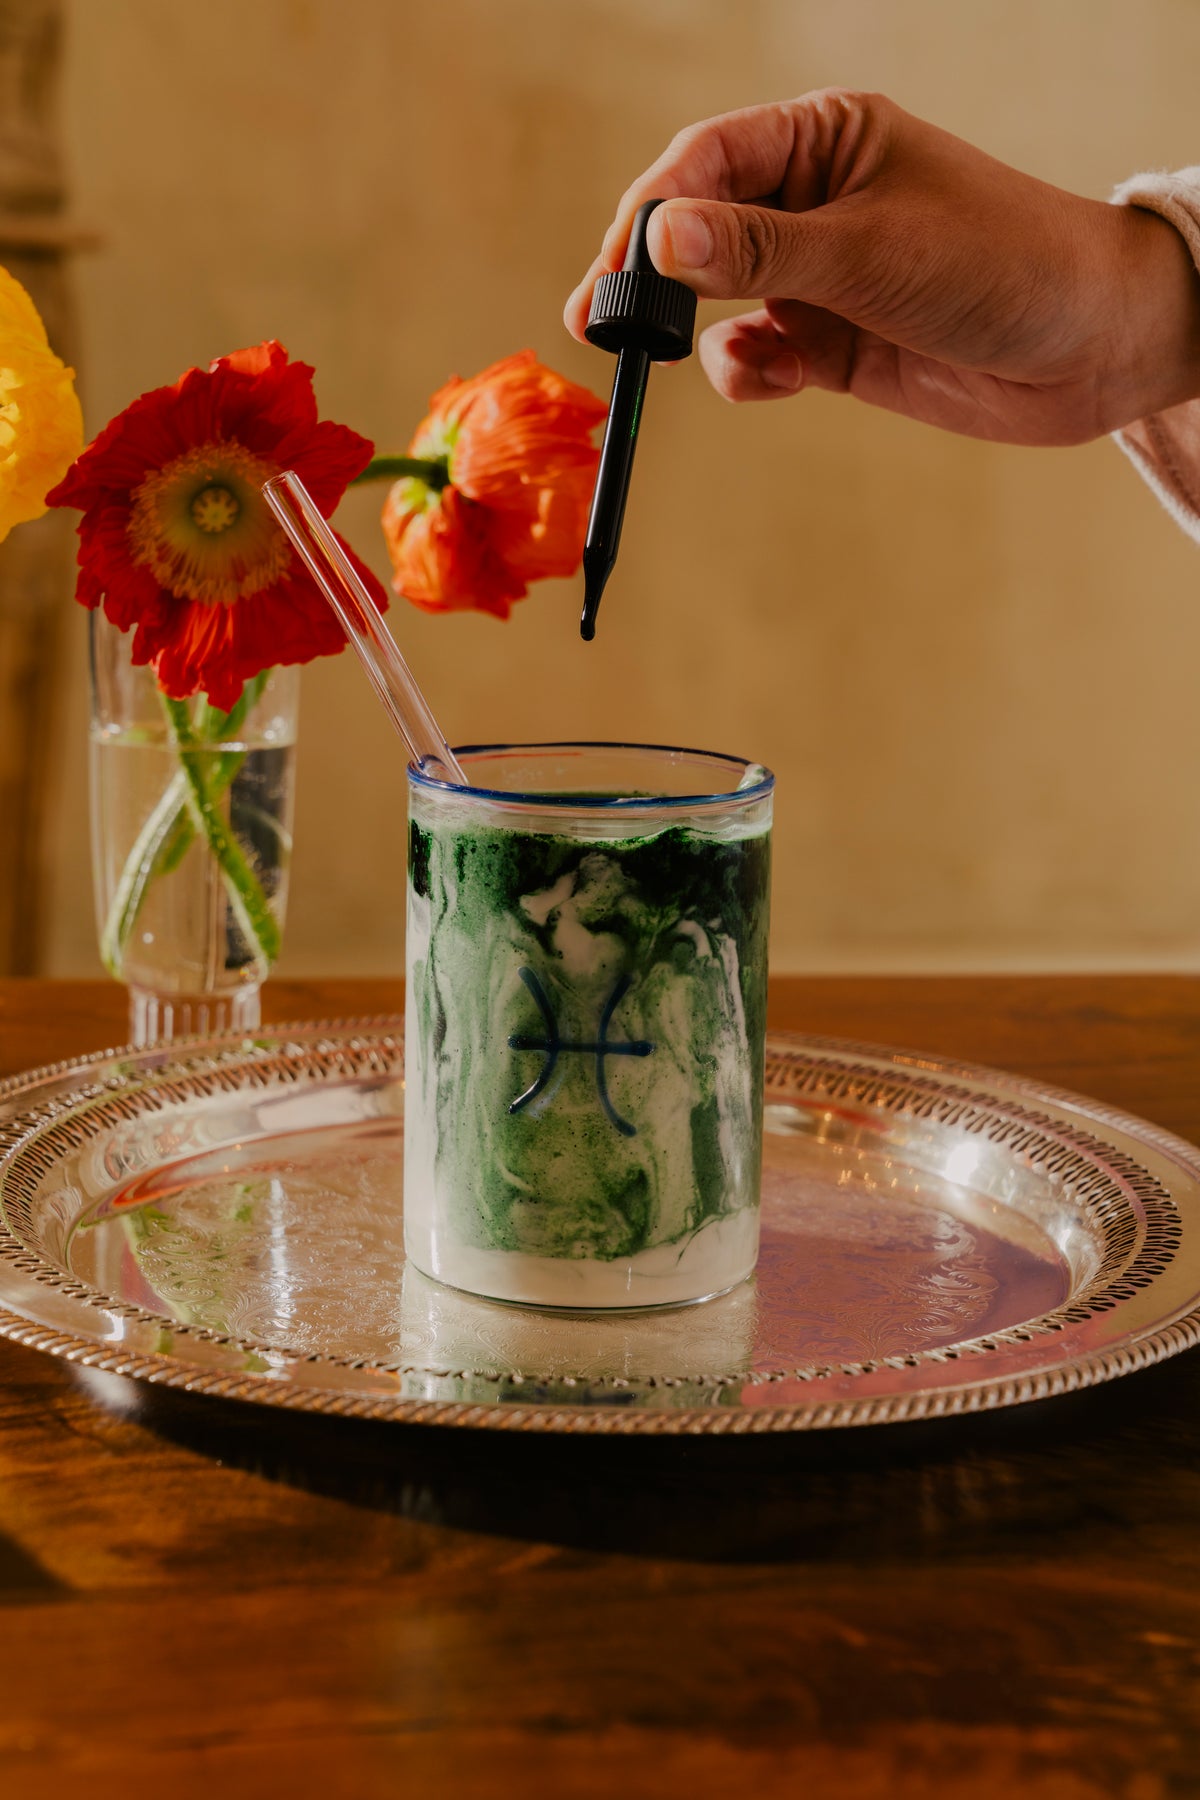 A marbled green and white smoothie in a clear glass adorned with a blue glass. Vibrant orange poppies in a vase in the background add a splash of color and a lively contrast to the earthy tones of the drink. The best fancy glass tumblers. But even if you don’t make these your everyday drinking glasses, you might pick up a two-tumbler set for special occasions or to have on hand as a last-minute host gift. 